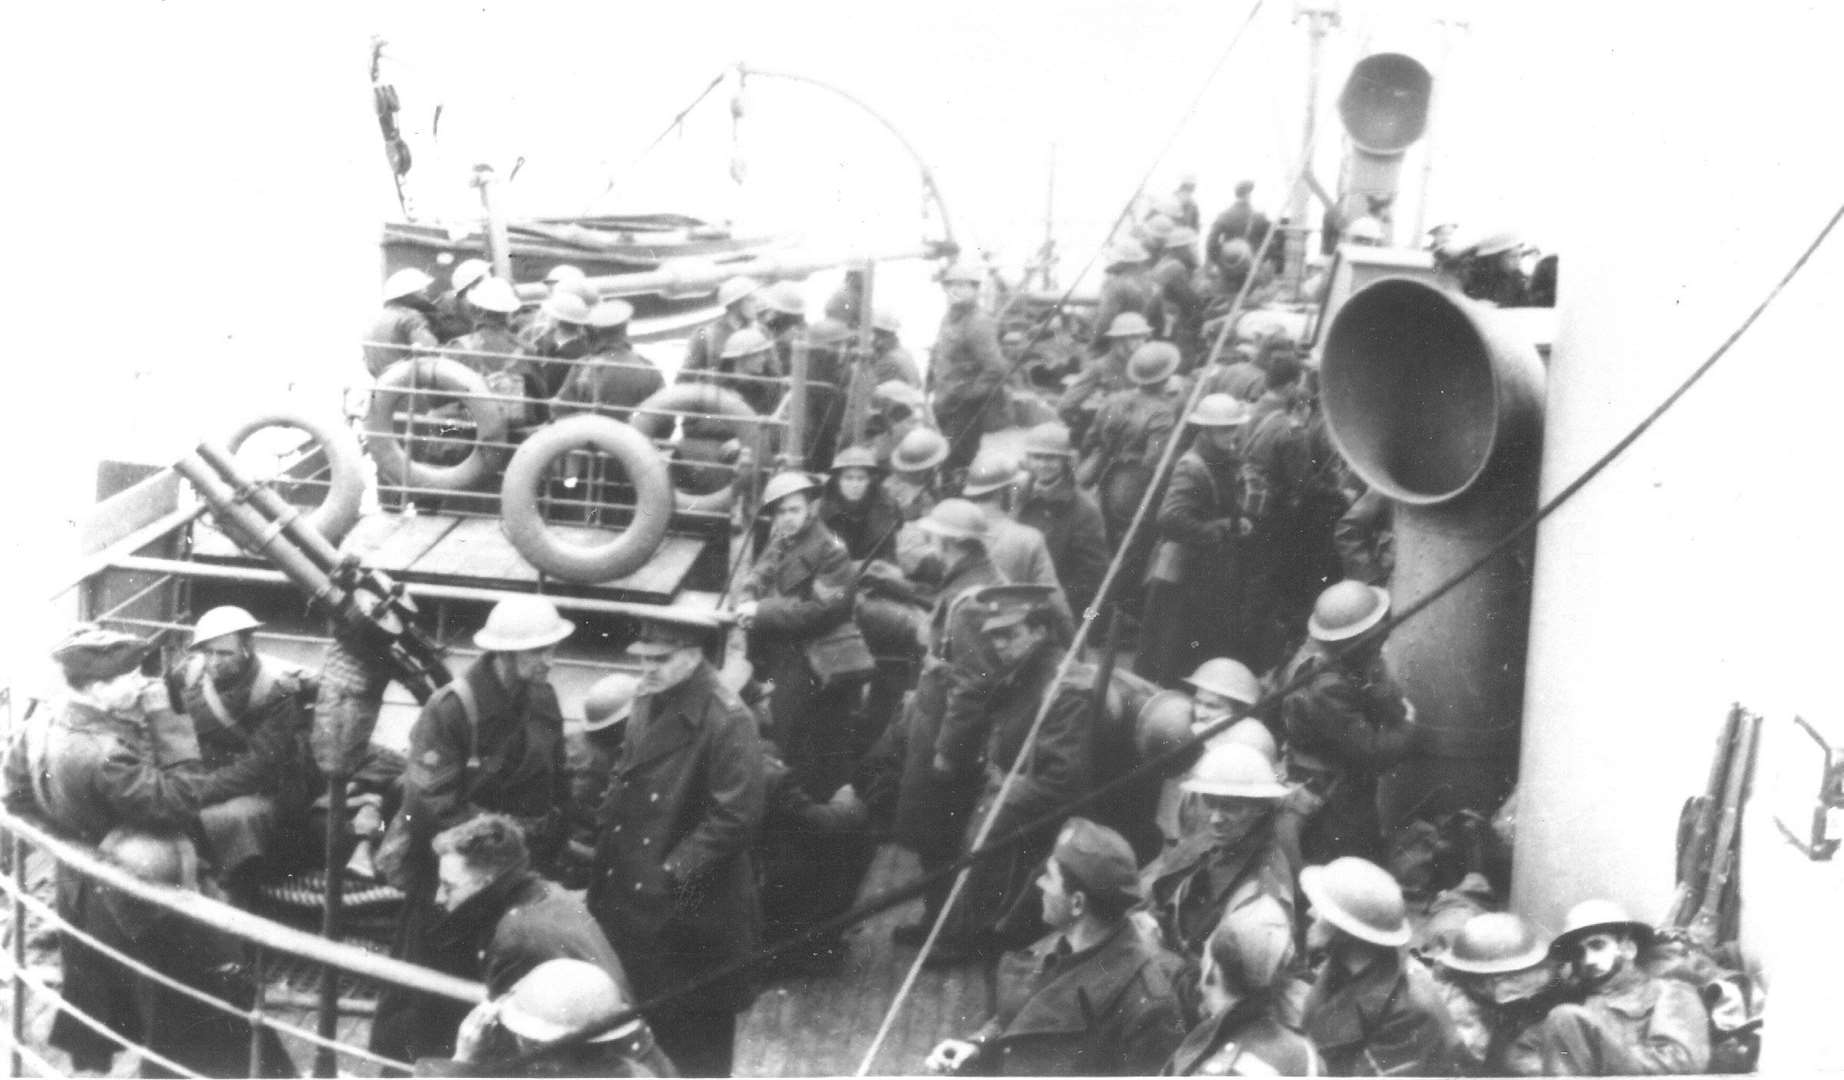 The Medway Queen loaded with soldiers evacuated from Dunkirk.